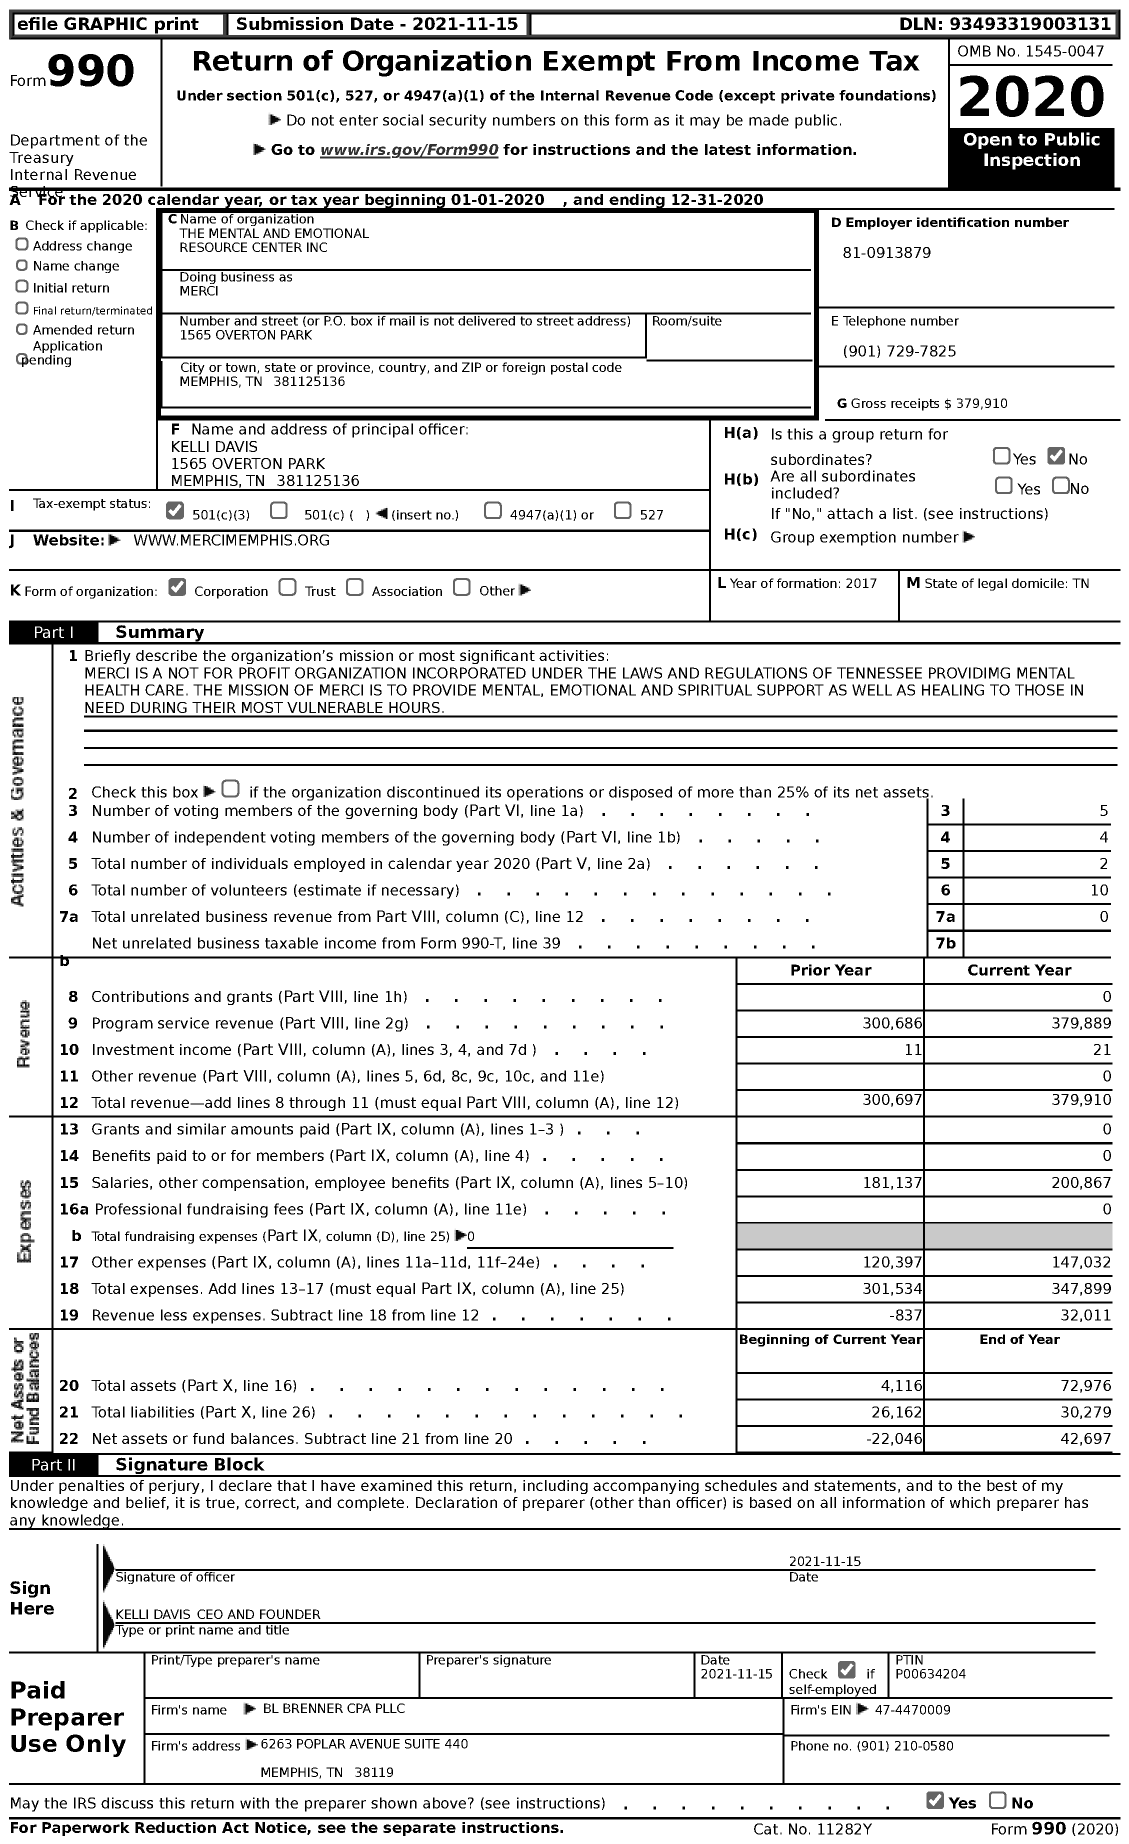 Image of first page of 2020 Form 990 for The Mental and Emotional Resource Center